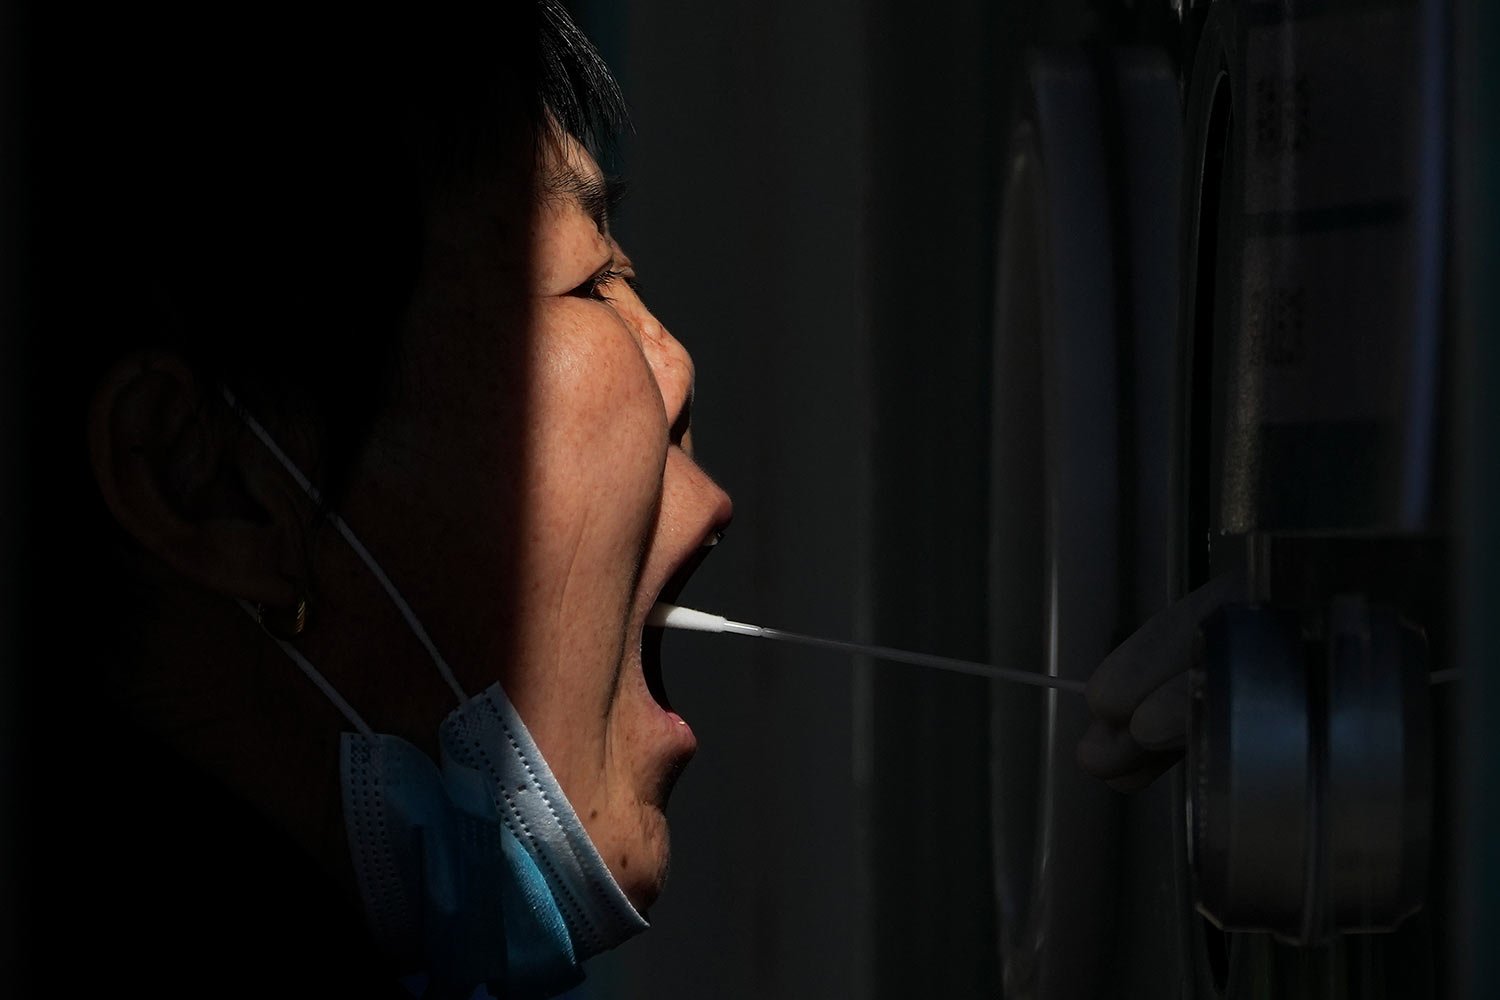  A woman gets her routine COVID-19 throat swab at a coronavirus testing site in Beijing, Sunday, Oct. 9, 2022. (AP Photo/Andy Wong) 